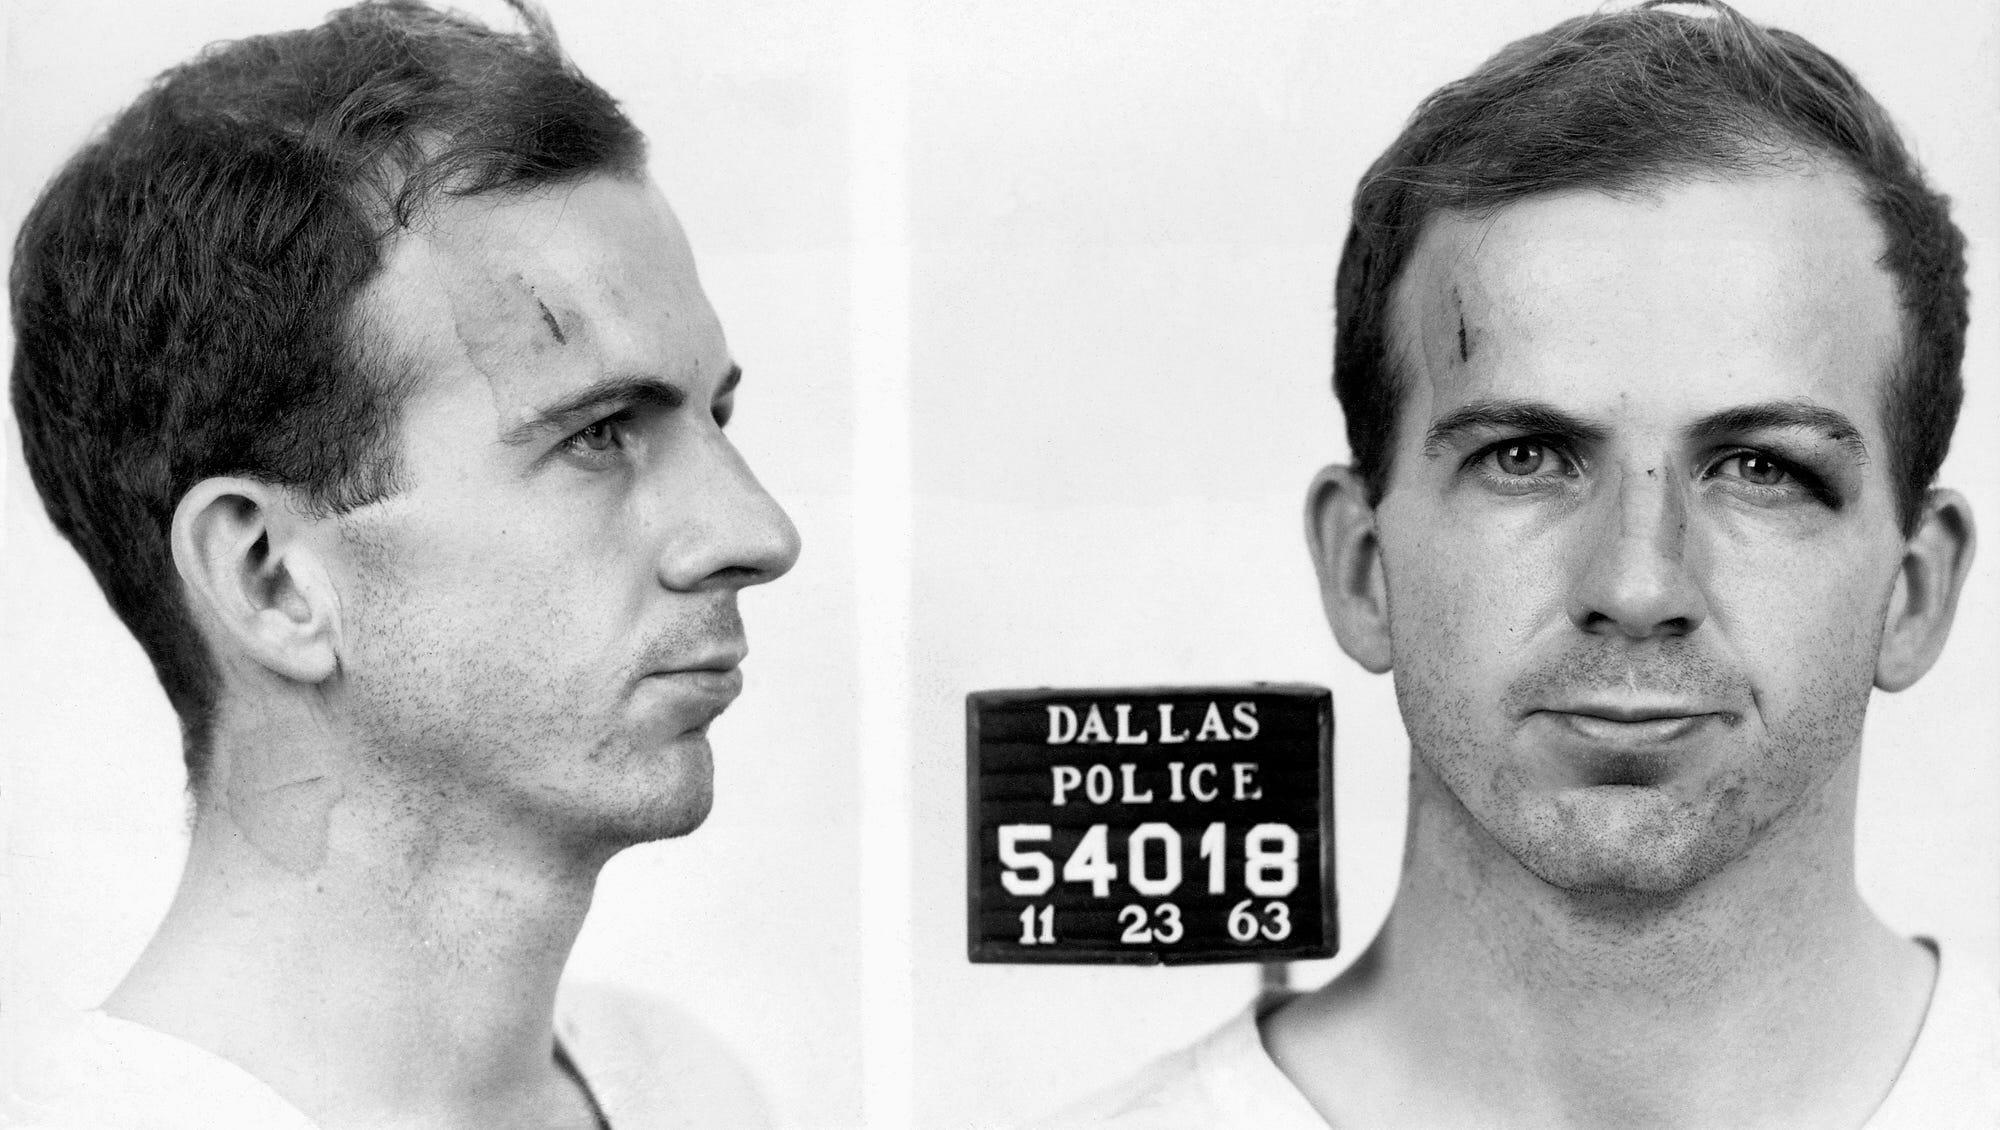 CIA: We had nothing to do with JFK assassin Lee Harvey Oswald